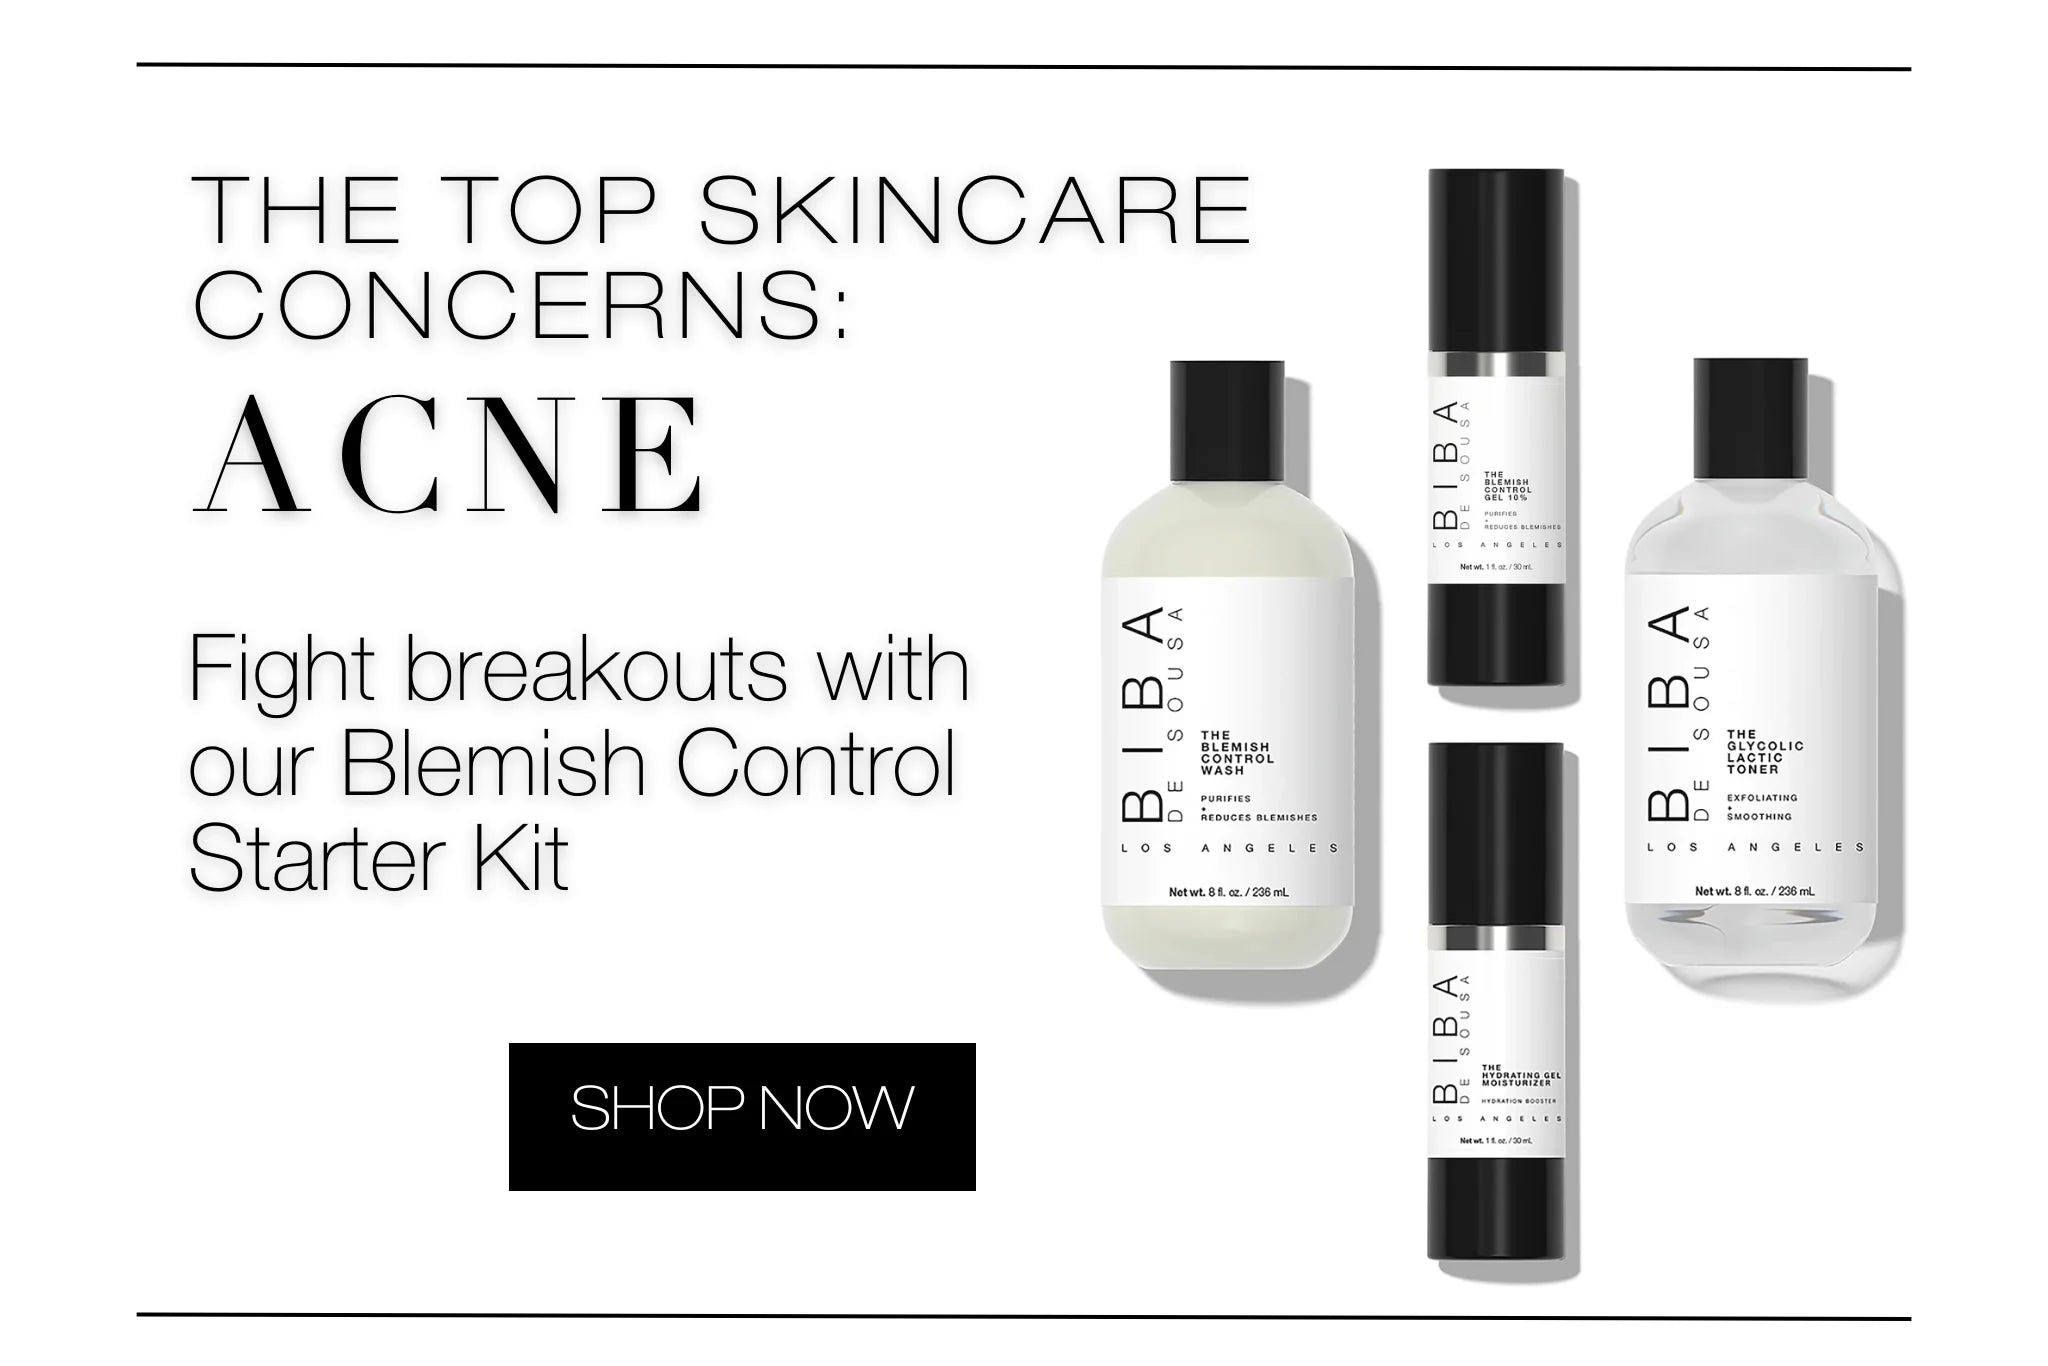 FIGHT BREAKOUTS WITH OUR BLEMISH CONTROL STARTER KIT